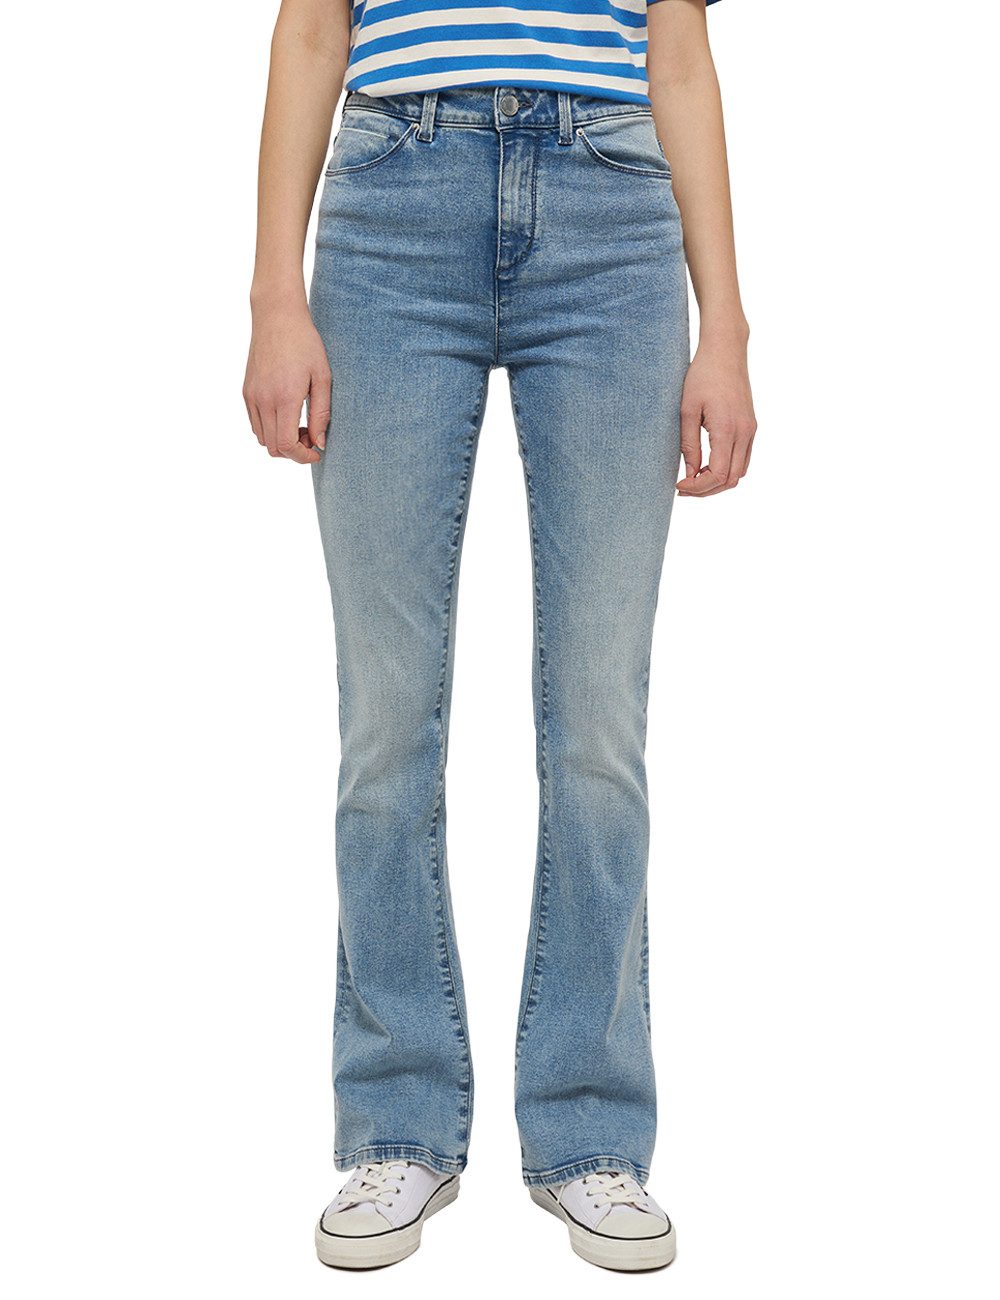 Mustang Comfort fit jeans Style Georgia Skinny Flared